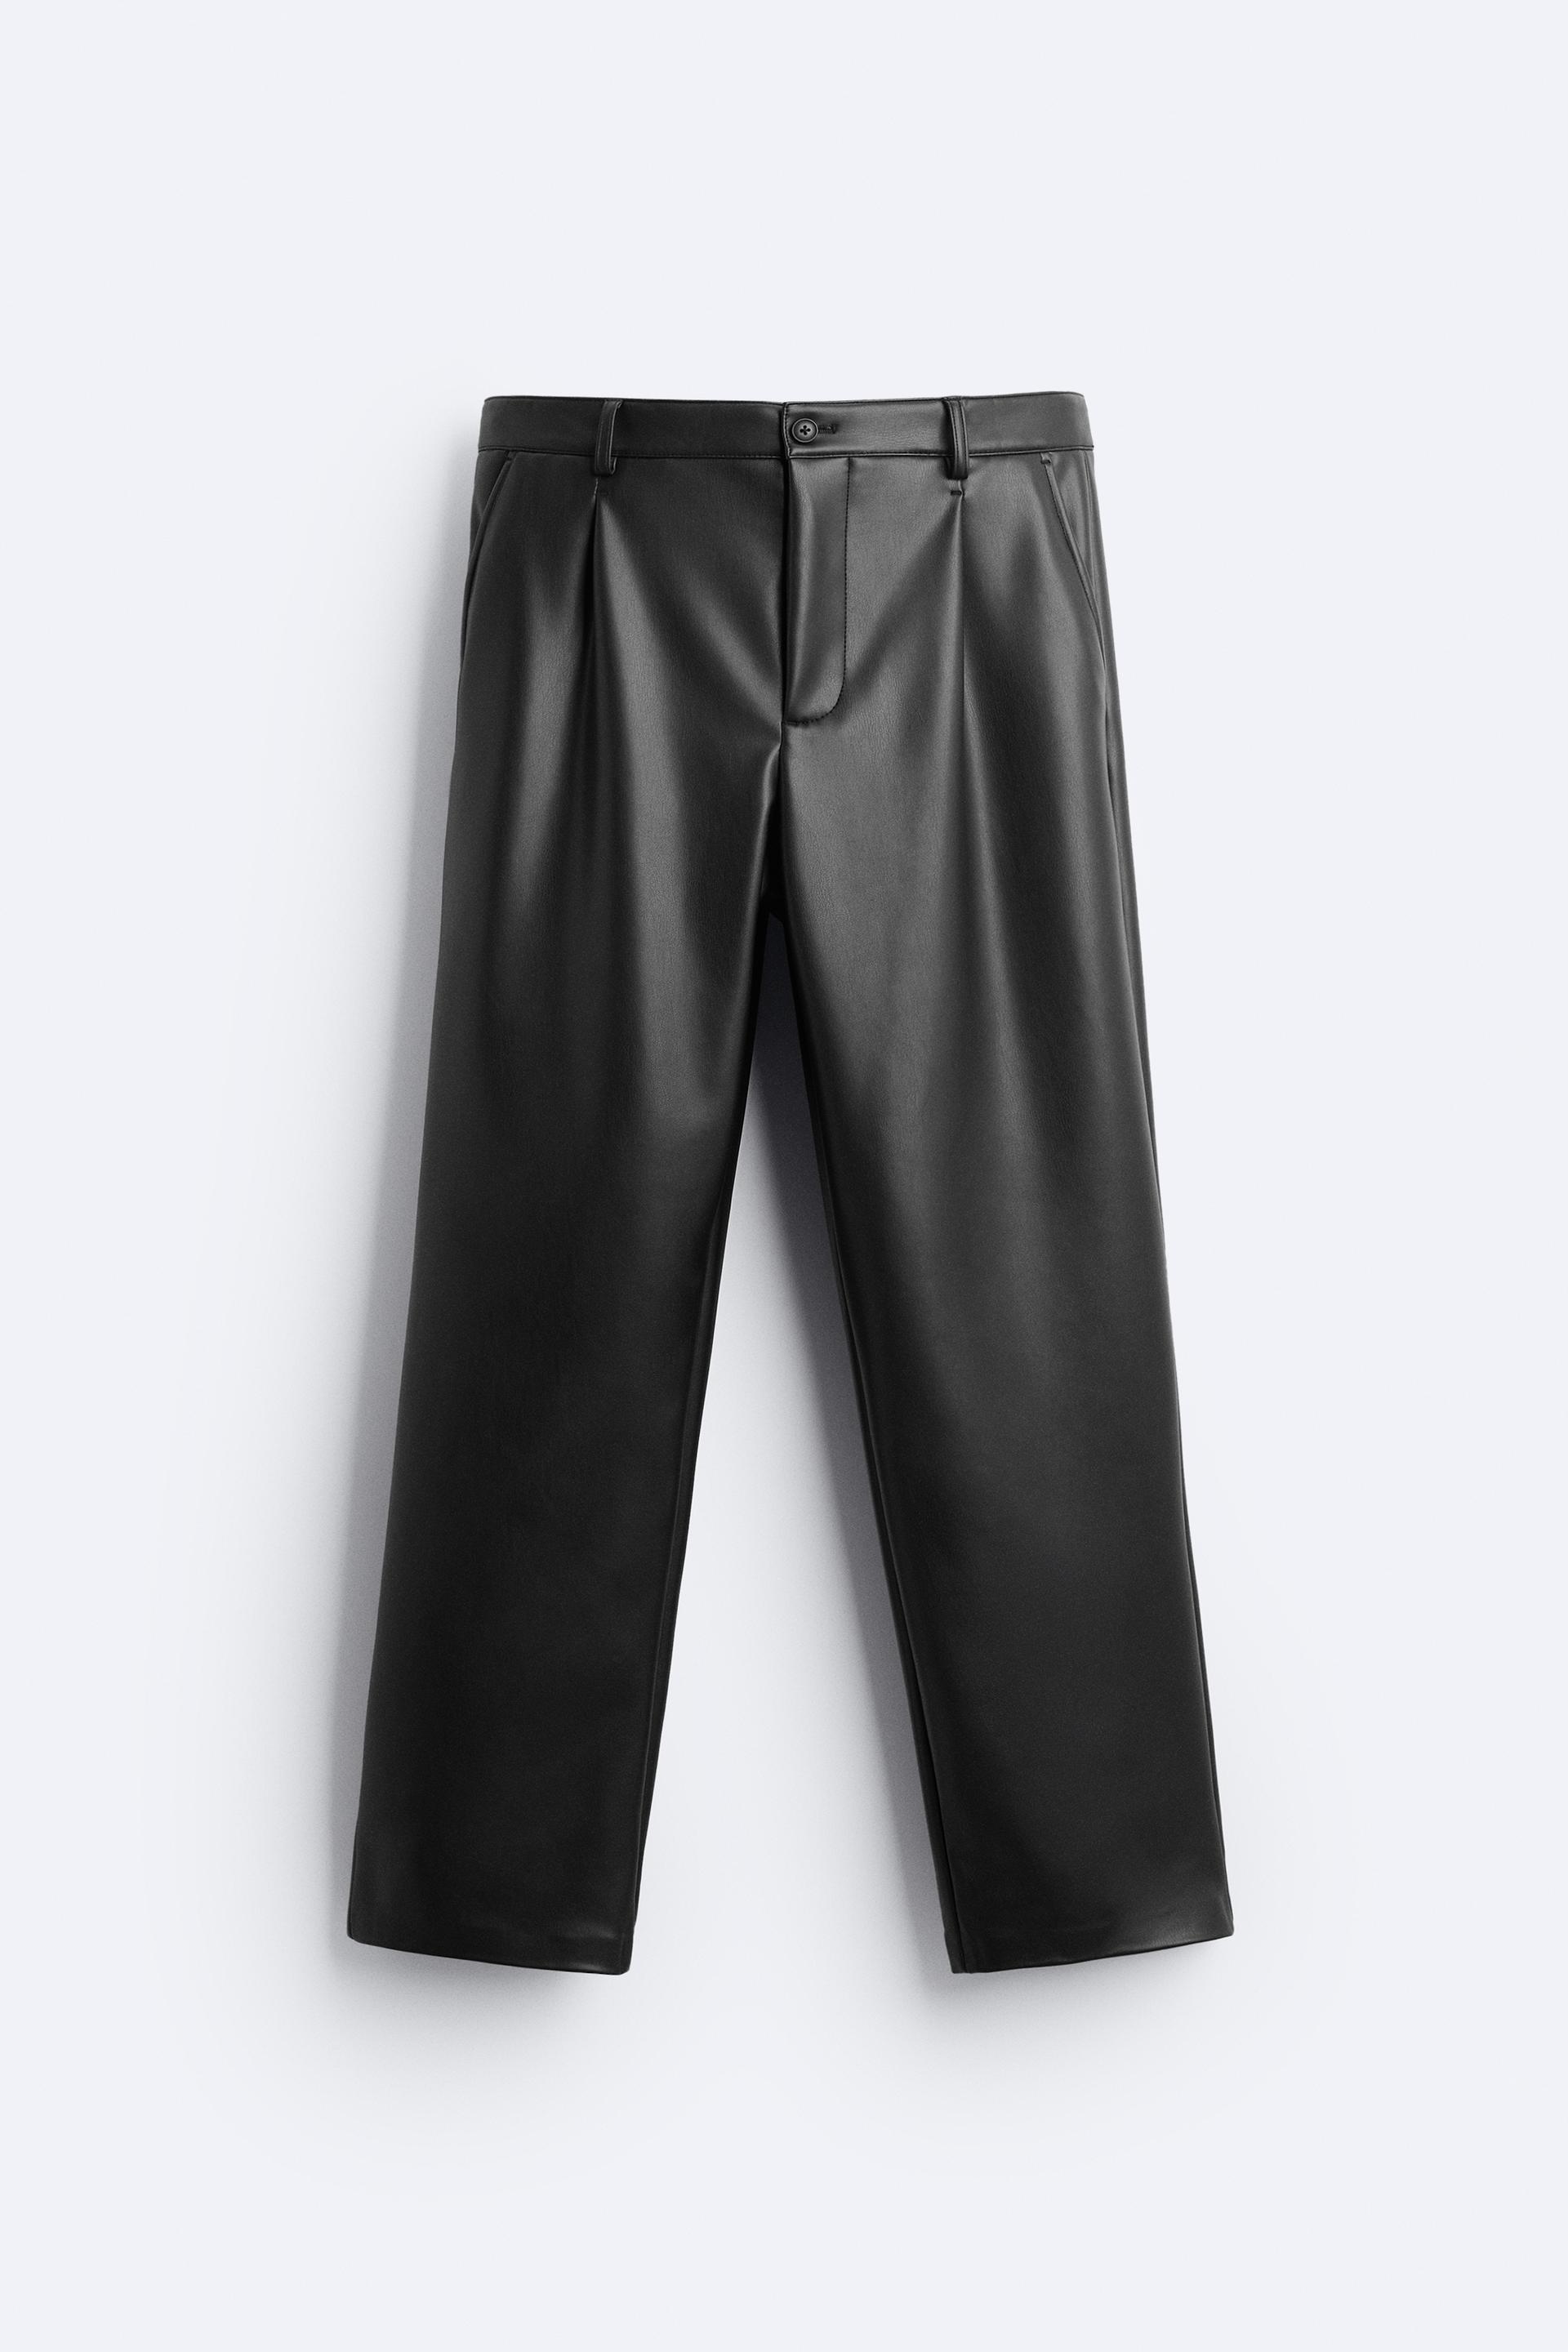 Zara High Rise Faux Leather Mom Fit Pants Black Small